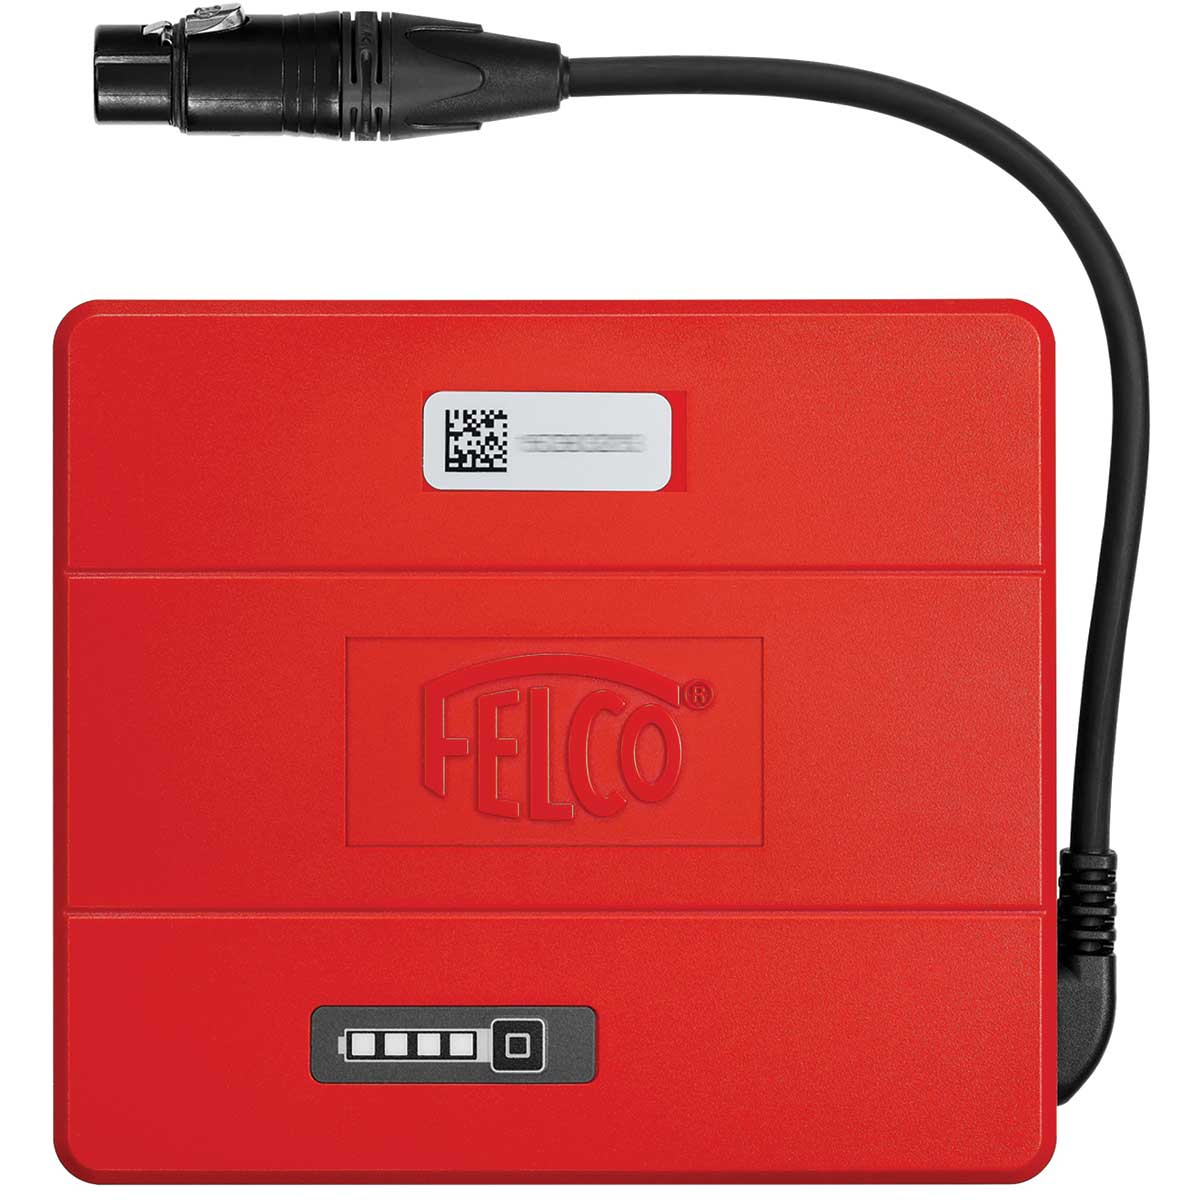 FELCO 812 Electric Pruner Kit with Standard Capacity Battery